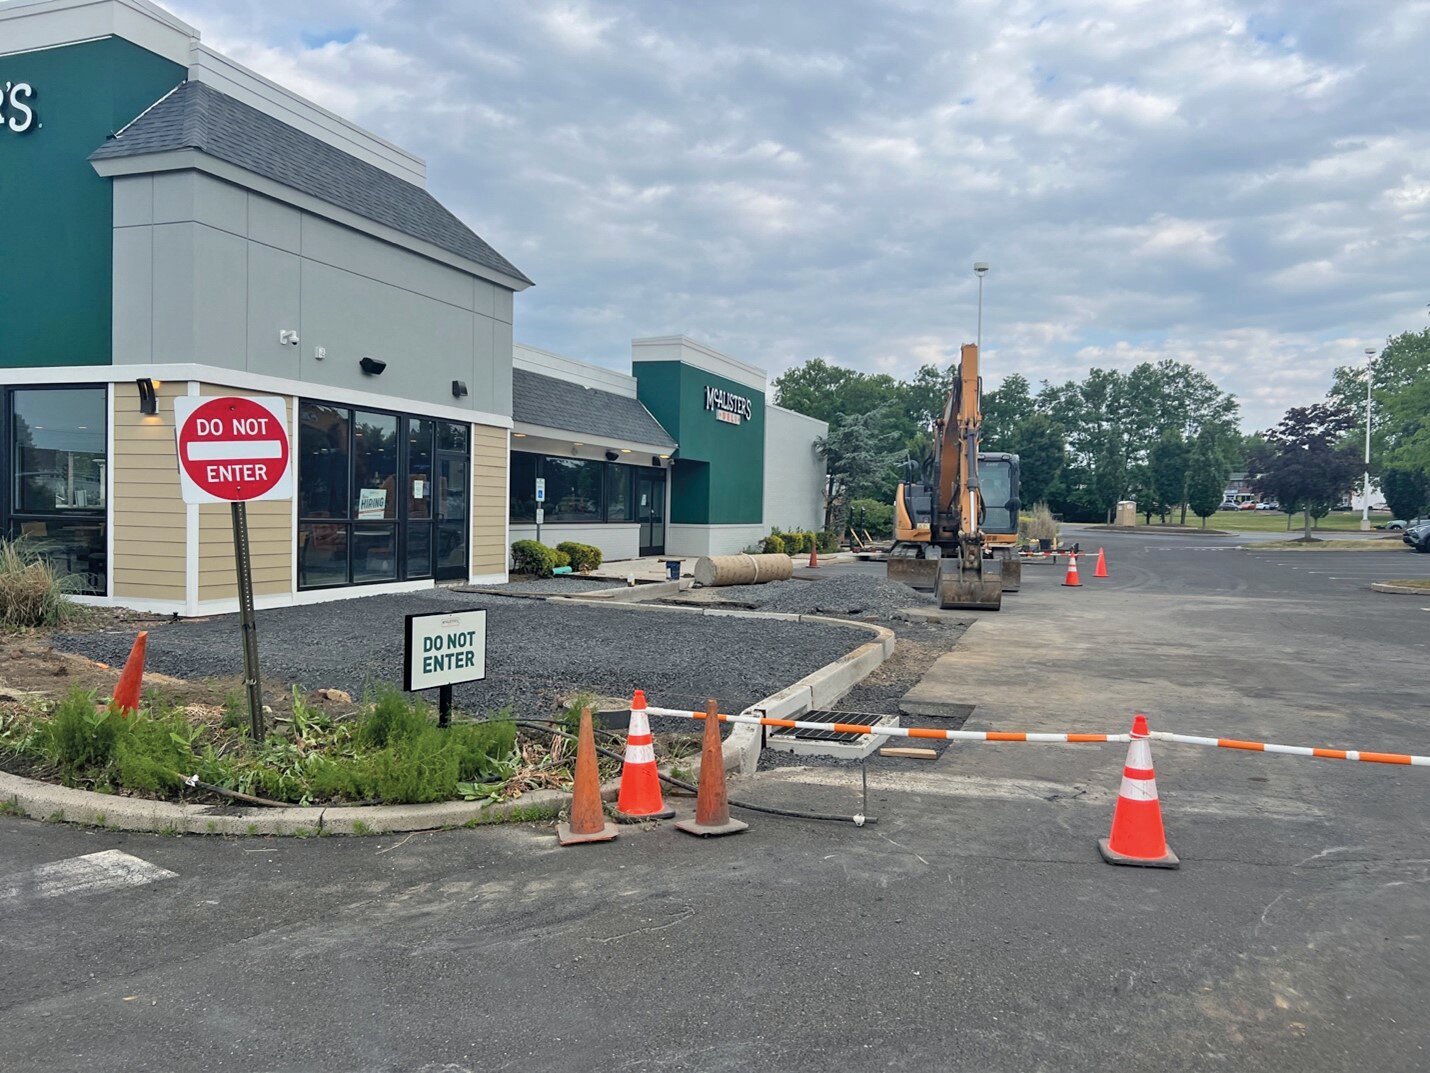 Construction is underway at McAlister’s Deli in Warrington. Officials are eyeing a grand opening this fall.